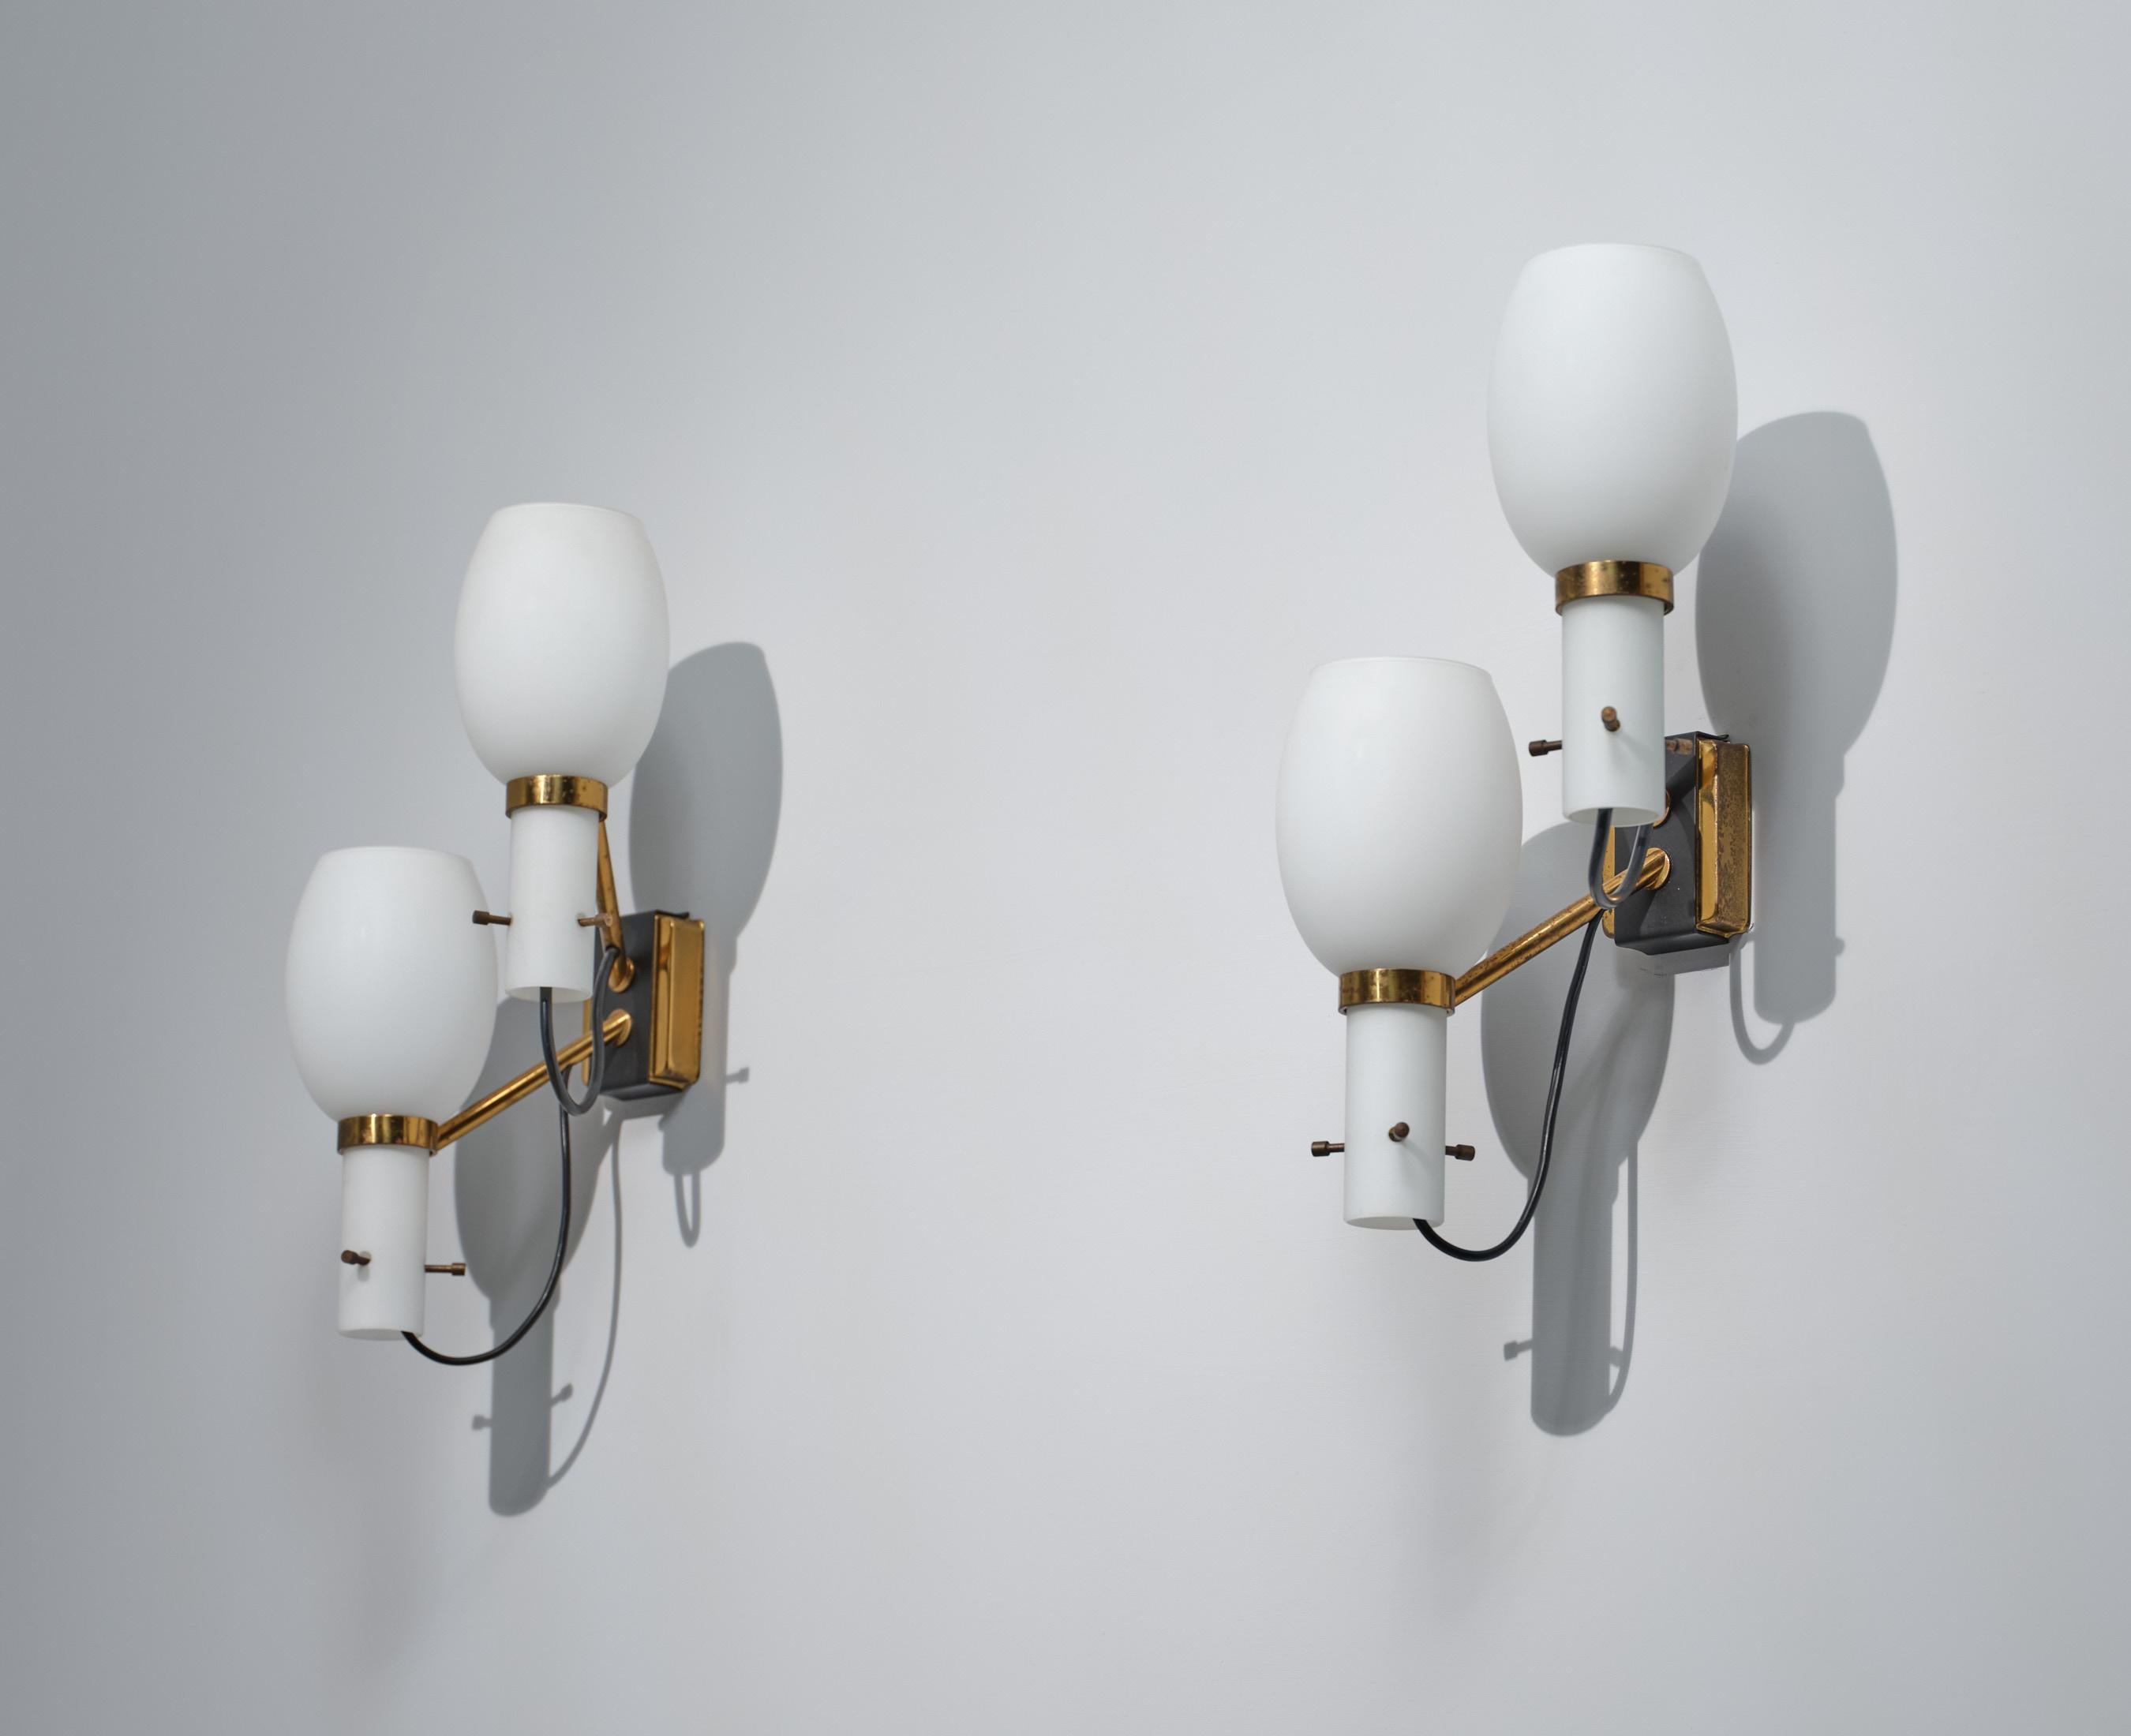 Exquisite Pair of Italian Mid-Century Modern Wall Sconces with Dual Light Source For Sale 3